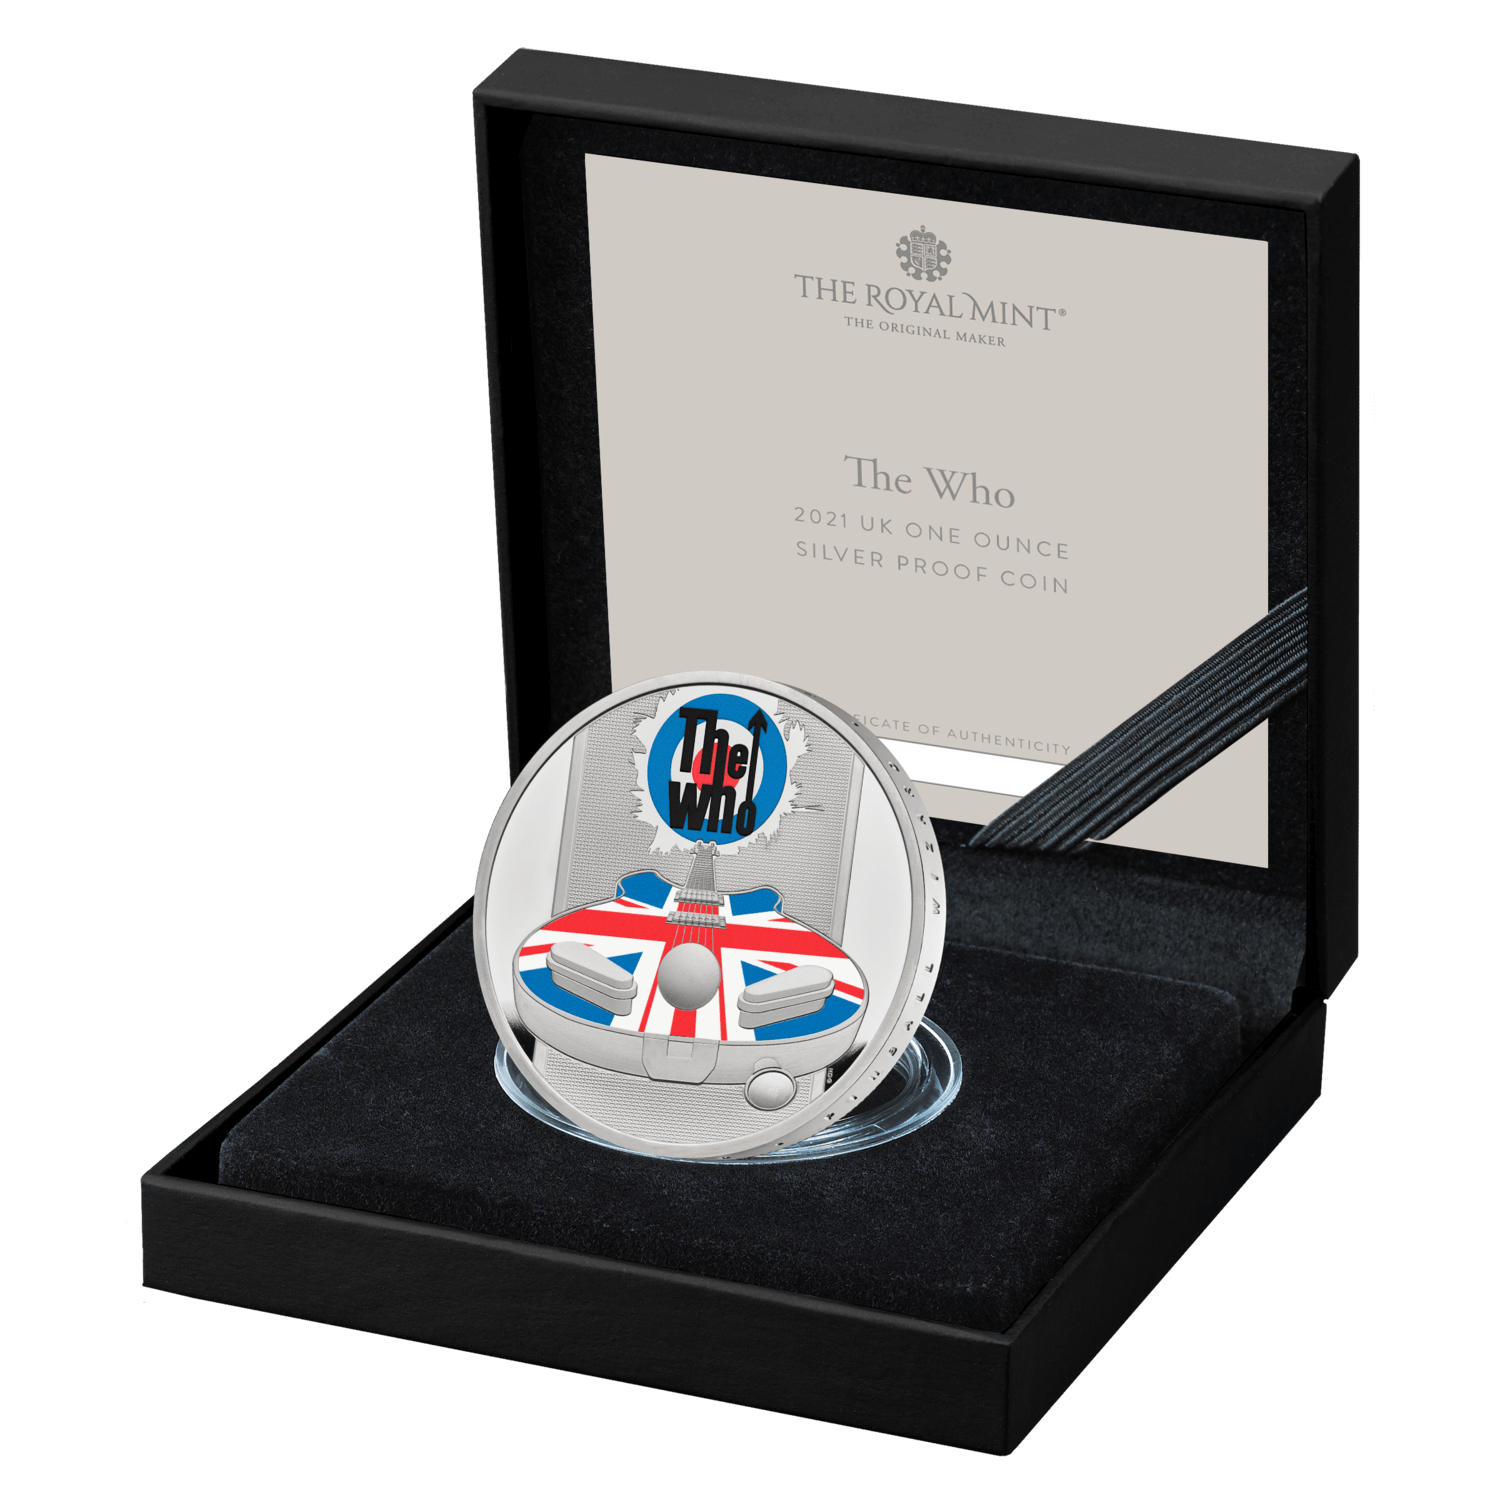 The Who 2021 UK One Ounce Silver Proof Coin | The Royal Mint